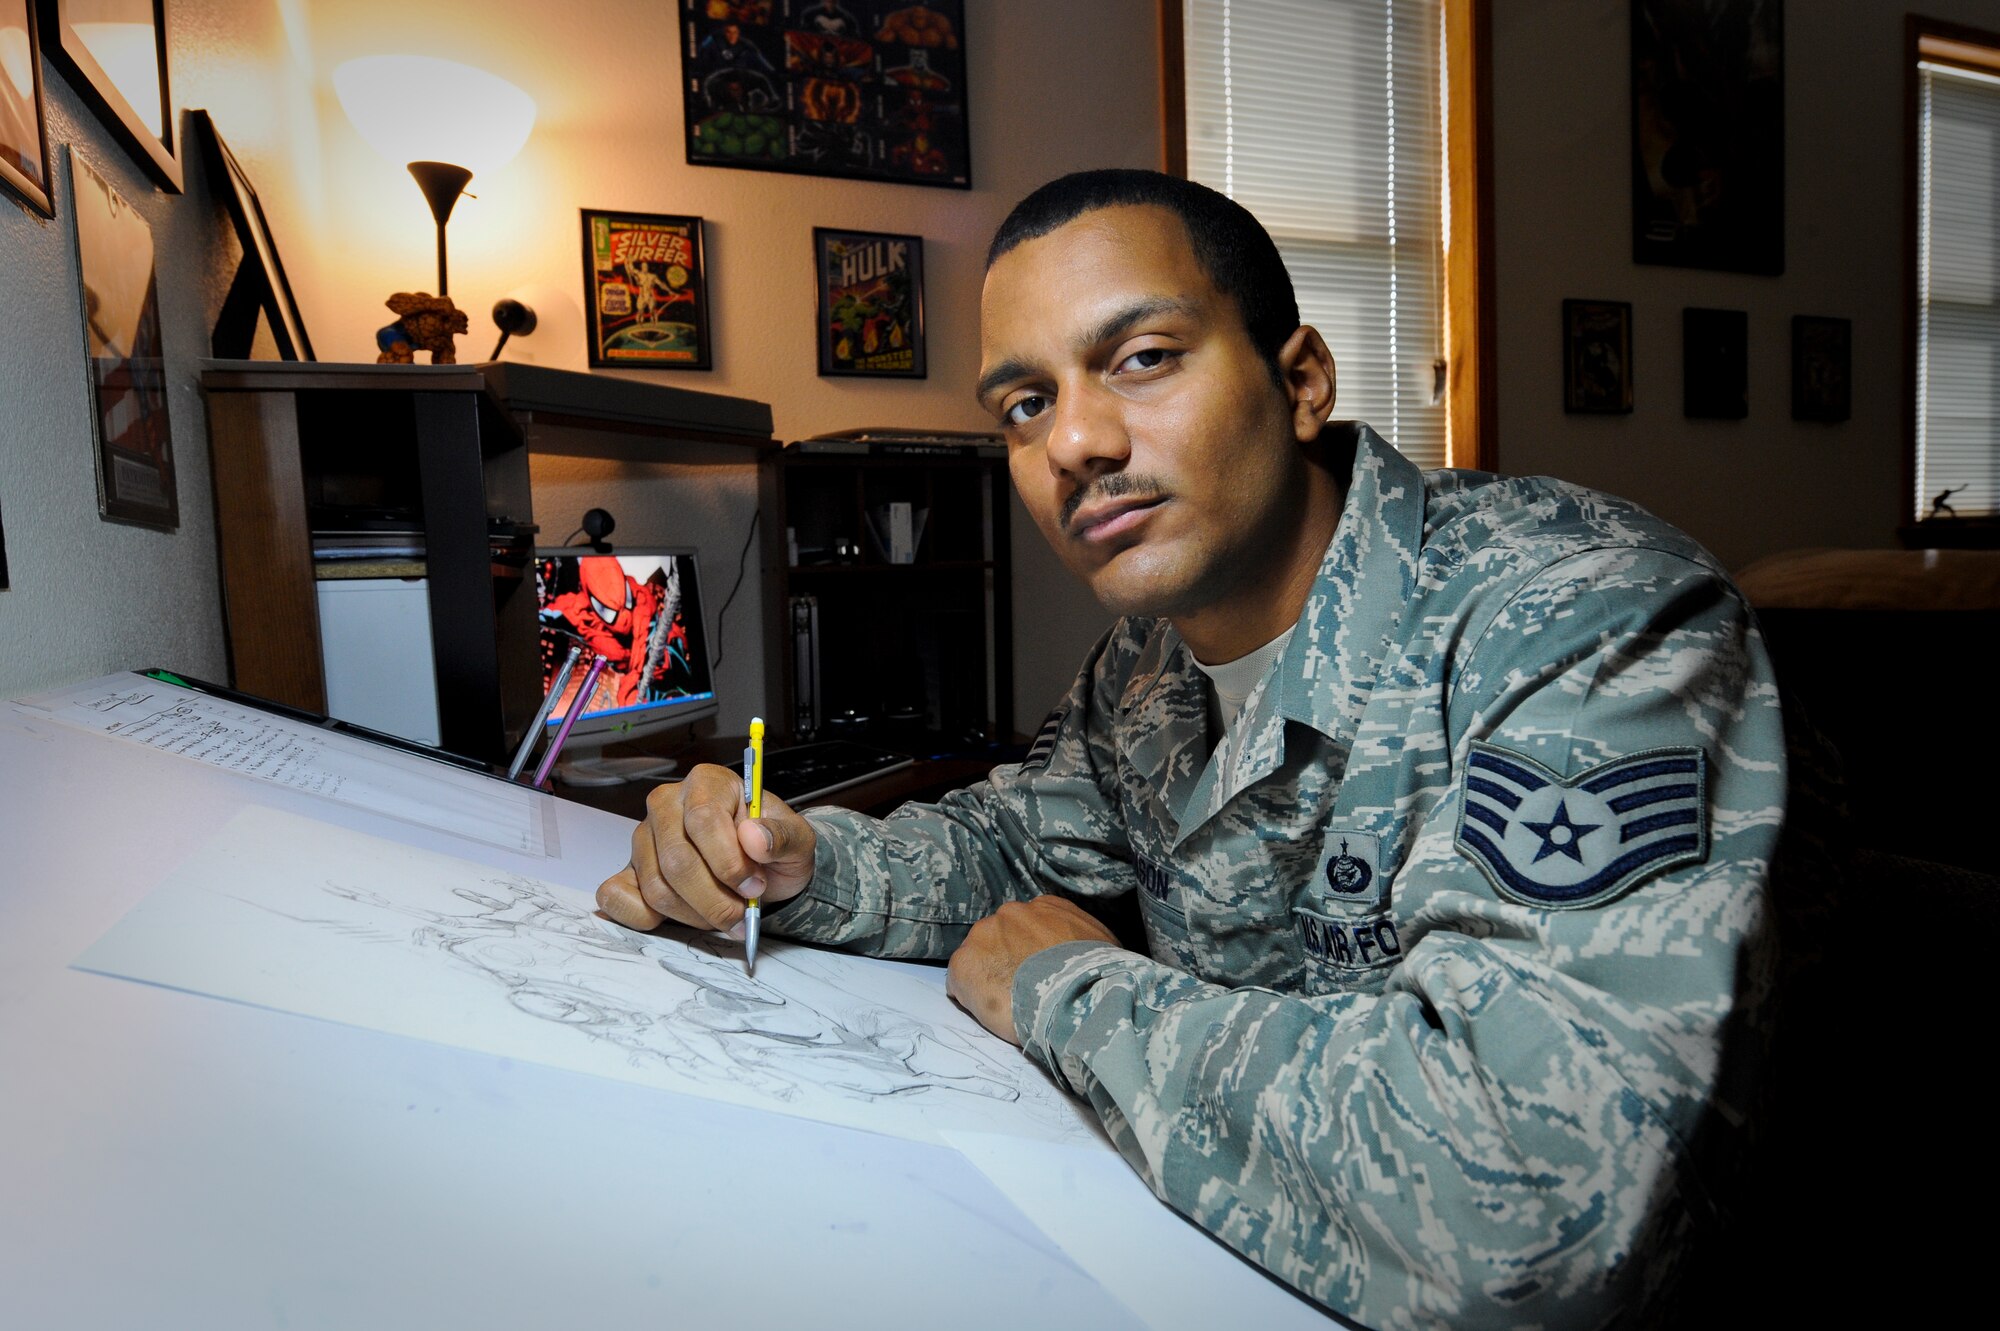 MINOT AIR FORCE BASE, N.D. -- Staff Sgt. Eric Henson, 5th Force Support Squadron base personnel reliability program monitor, poses for a picture next to his sketch of Marvel comics “Spiderman” in his home here Aug. 11. Sergeant Henson has been a comic artist since he was five years old when his father gave him a “Silver Surfer” comic book. (U.S. Air Force photo by Senior Airman Benjamin Stratton)